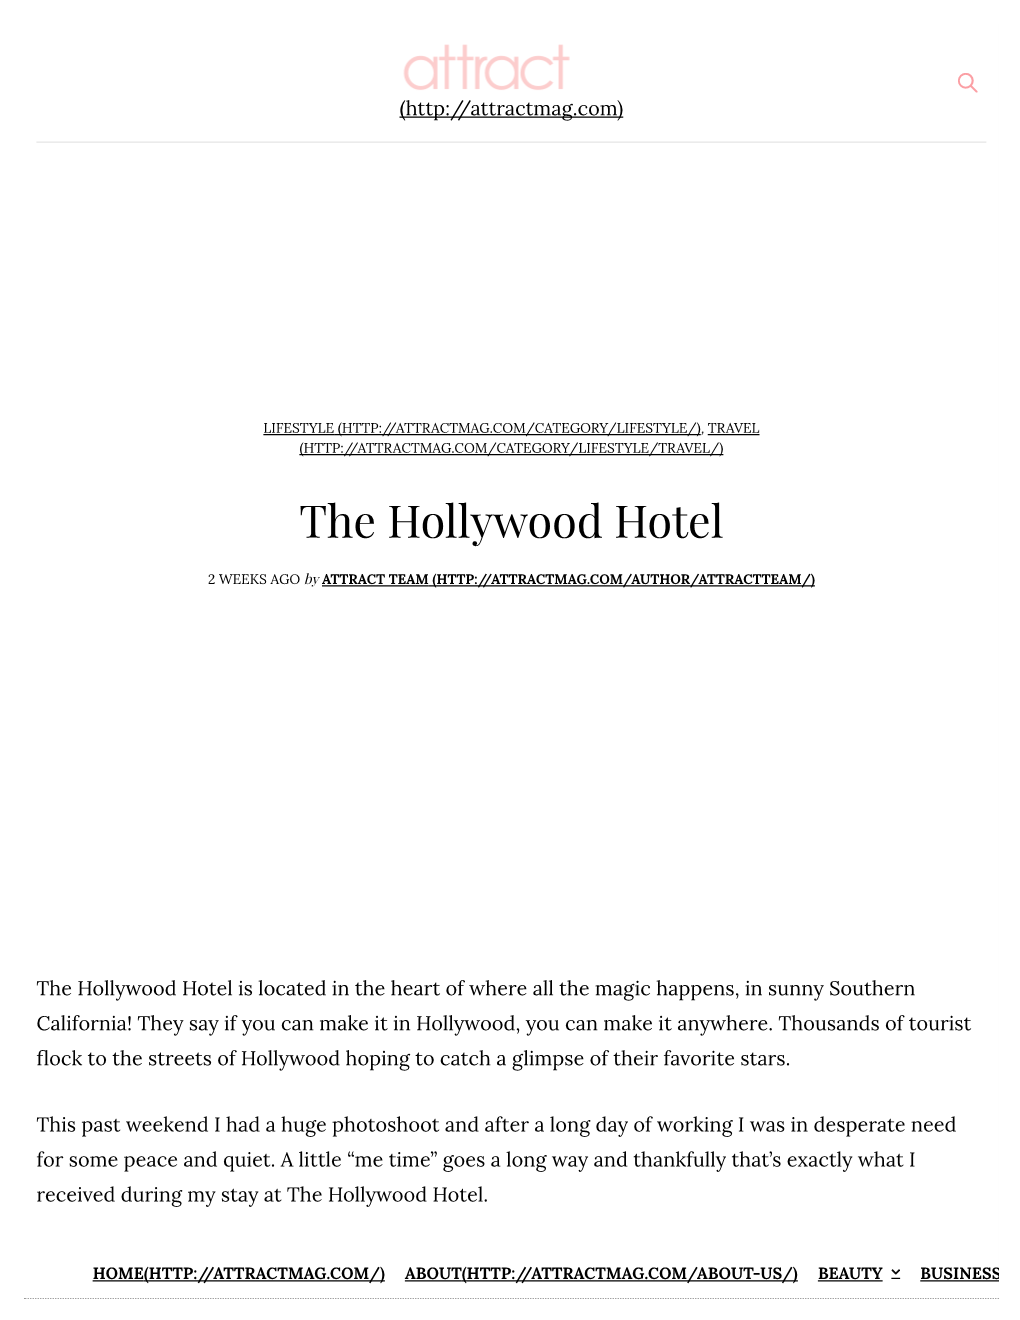 The Hollywood Hotel